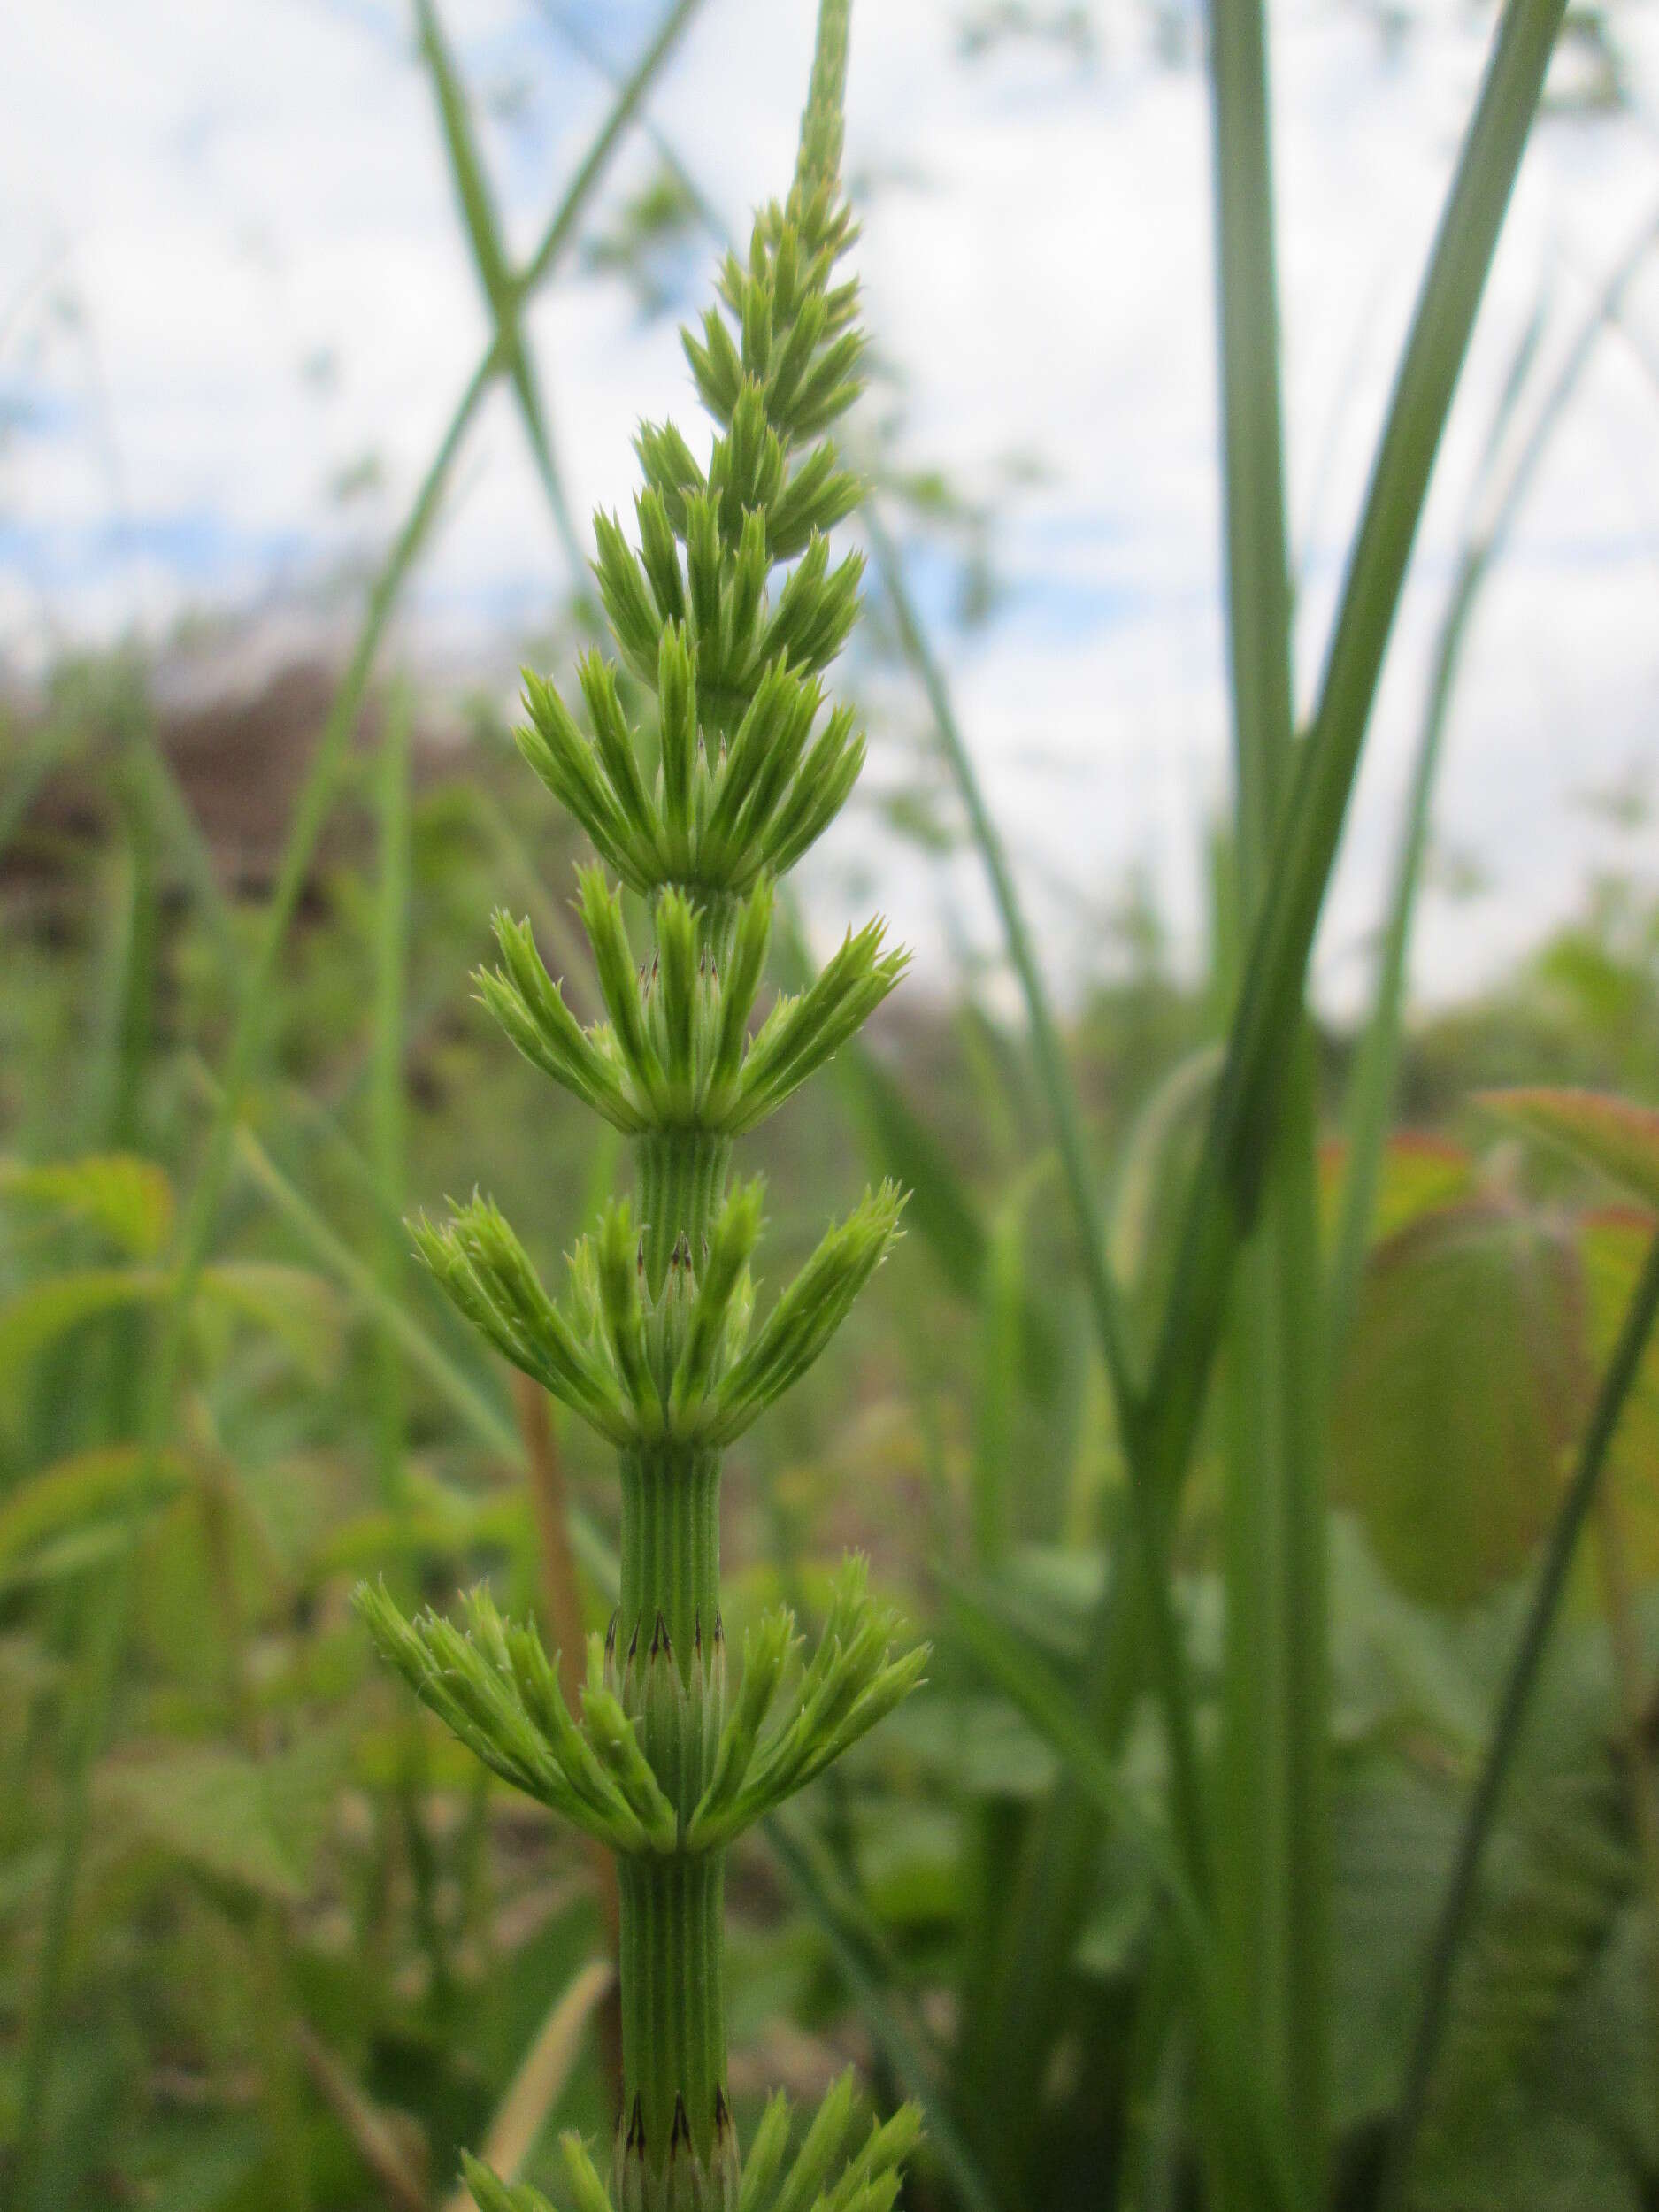 Image of field horsetail